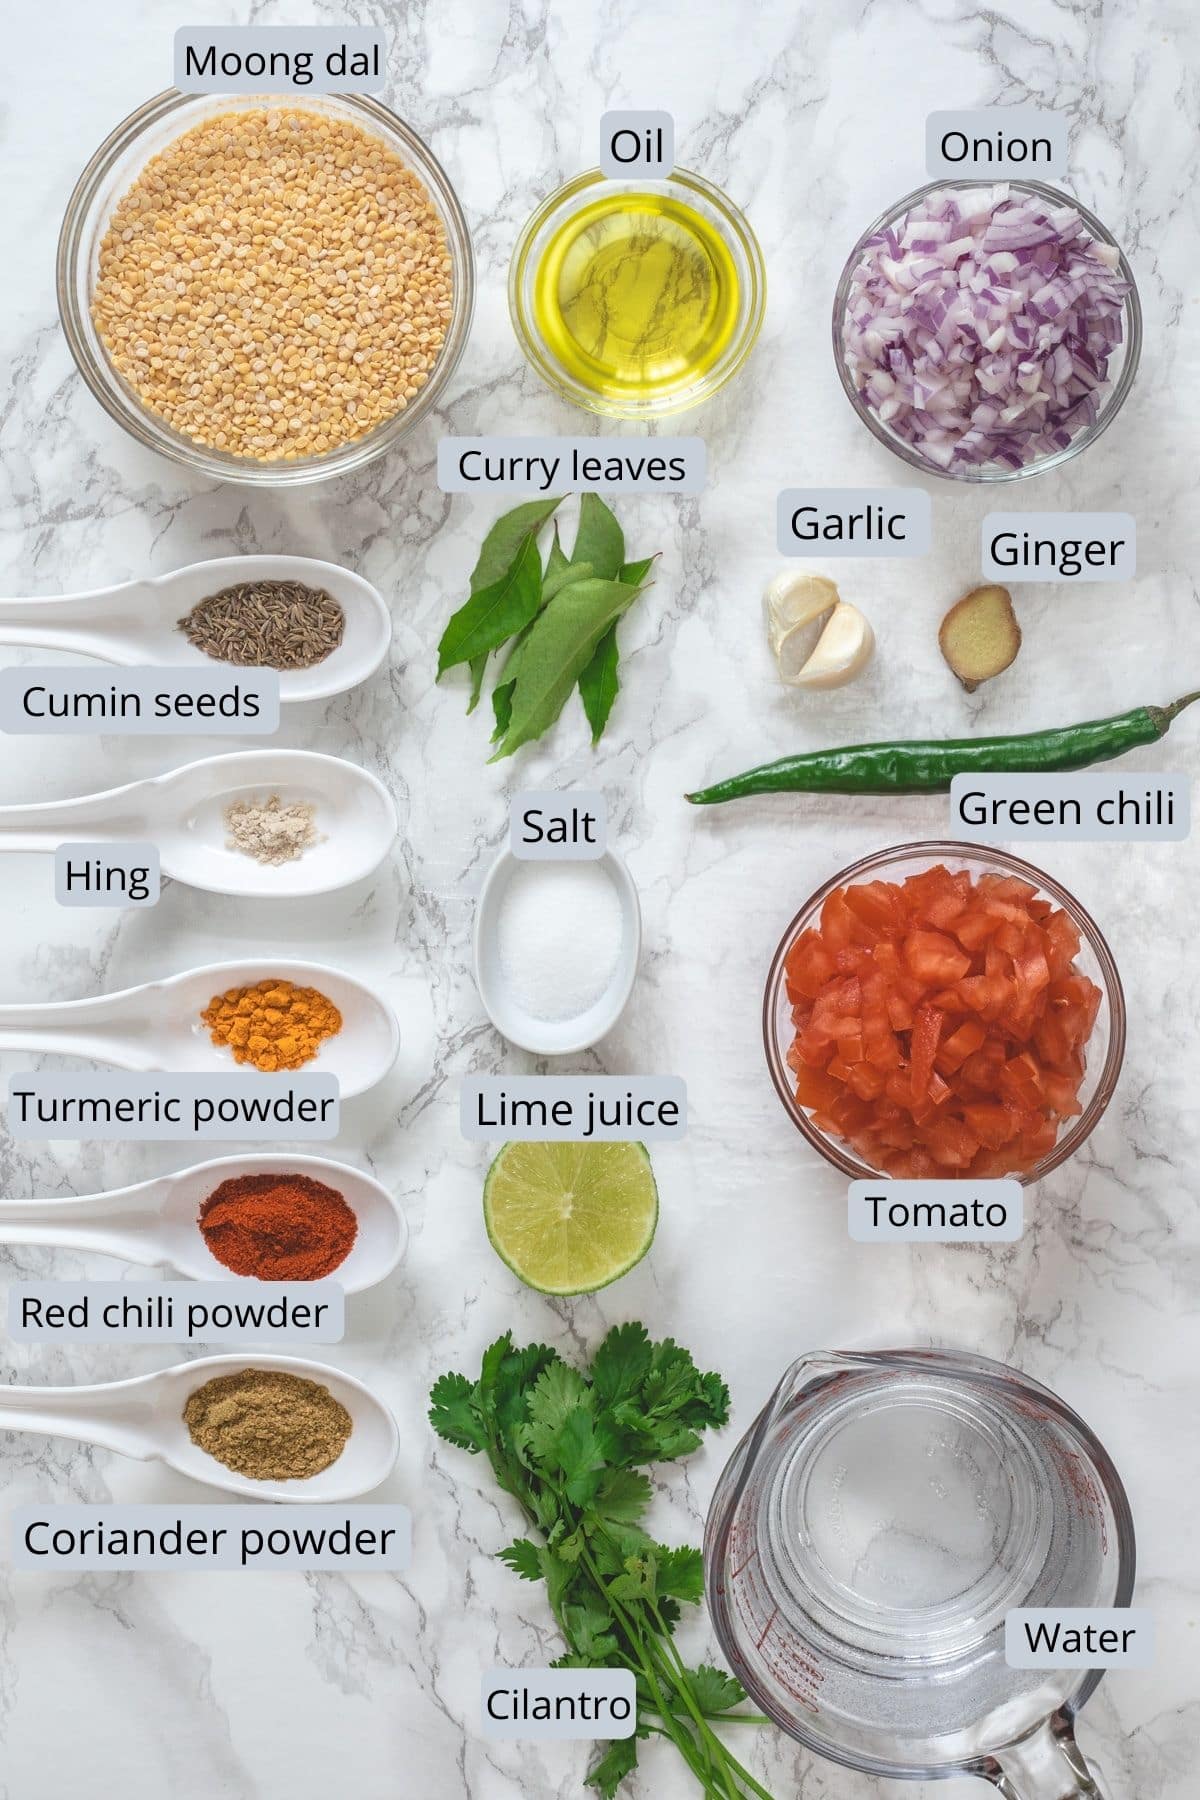 Ingredients used for moong dal with labels on marble background.